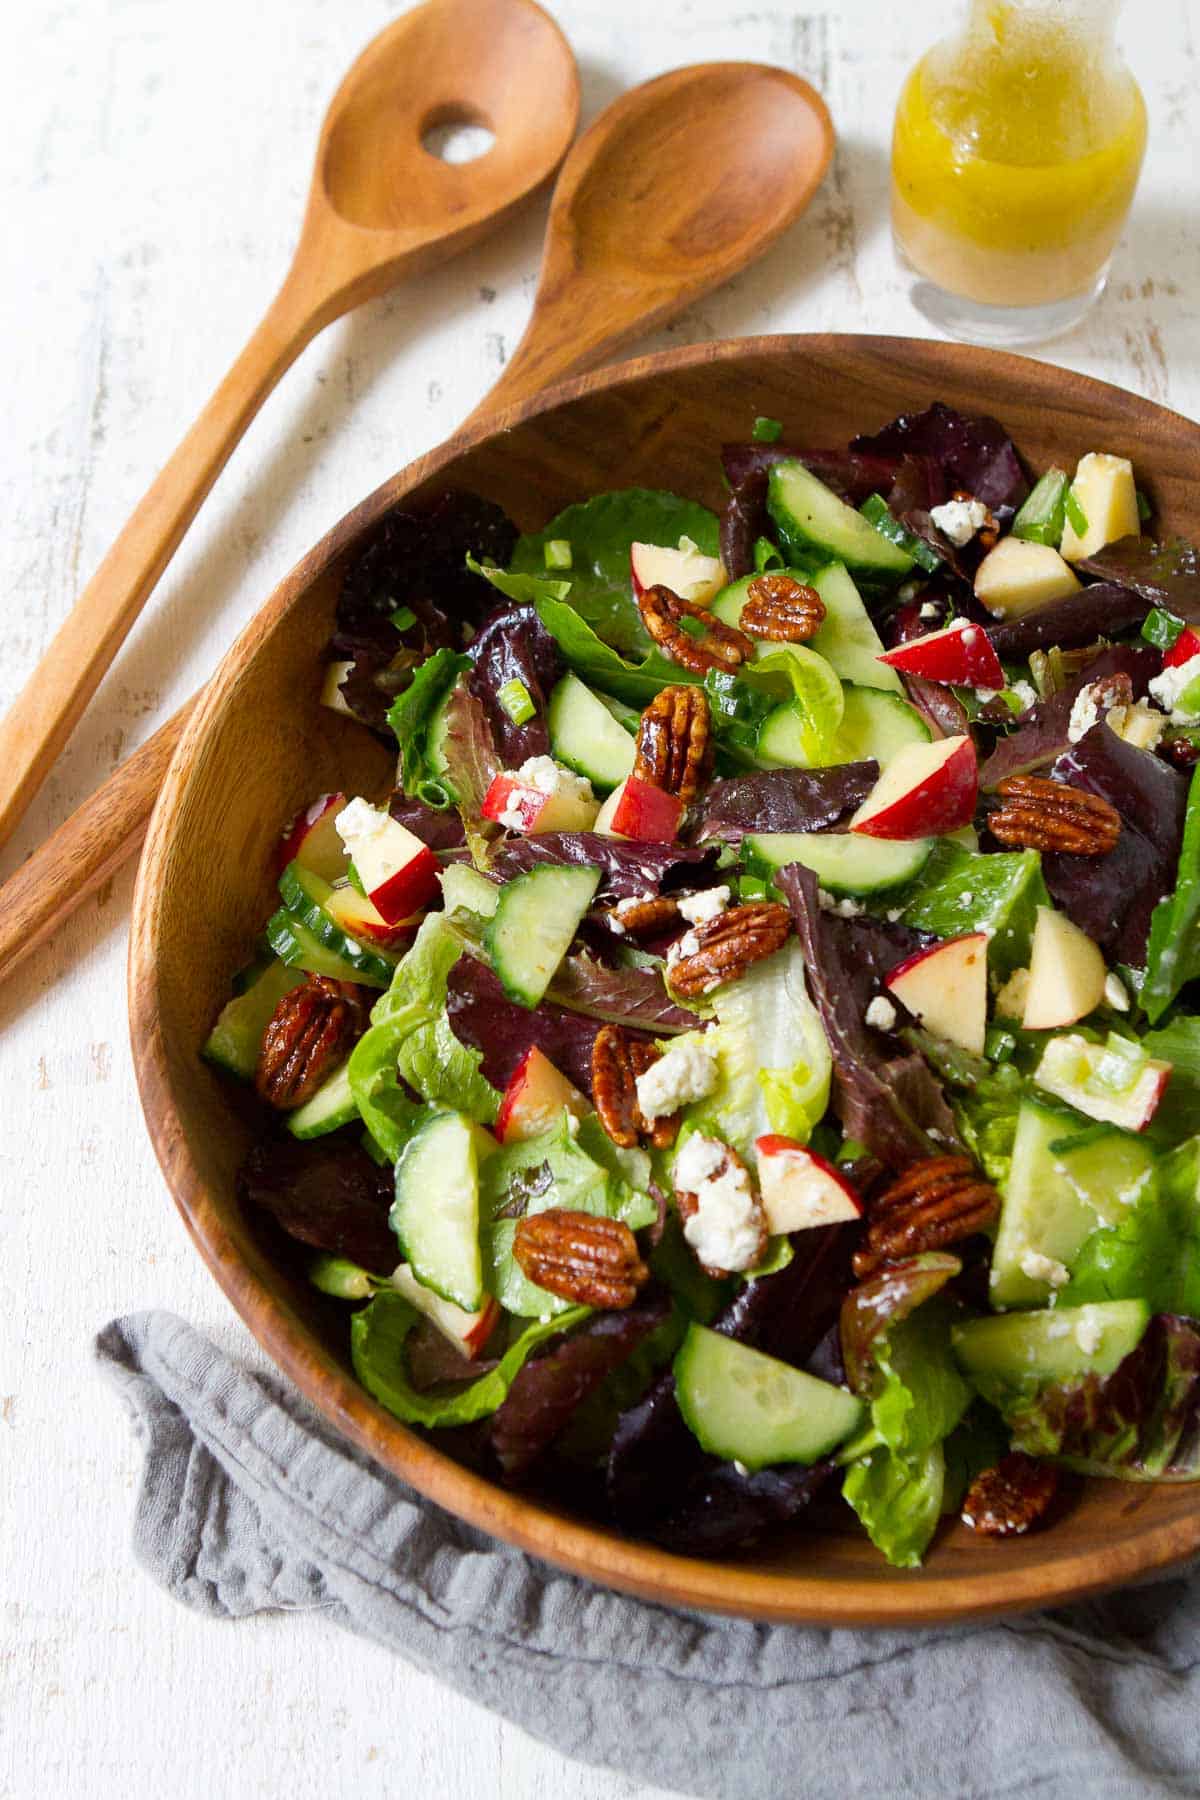 Autumn salad with pecans and apple in a wooden salad bowl.